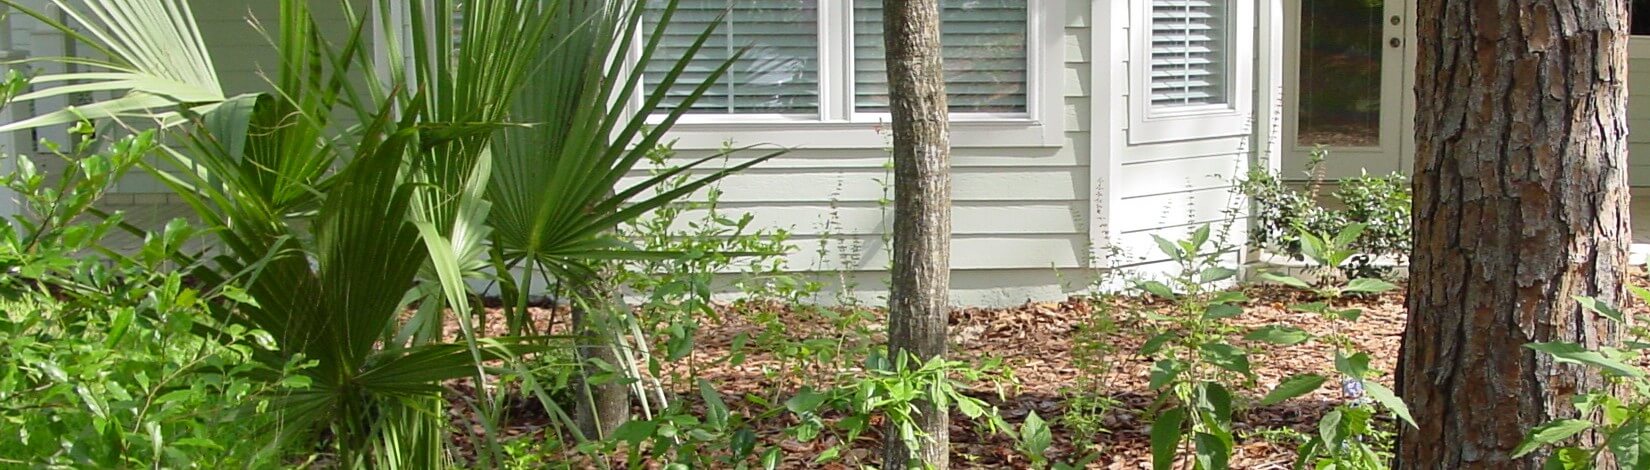 detail of a well maintained and sustainable front yard in front of a residential home